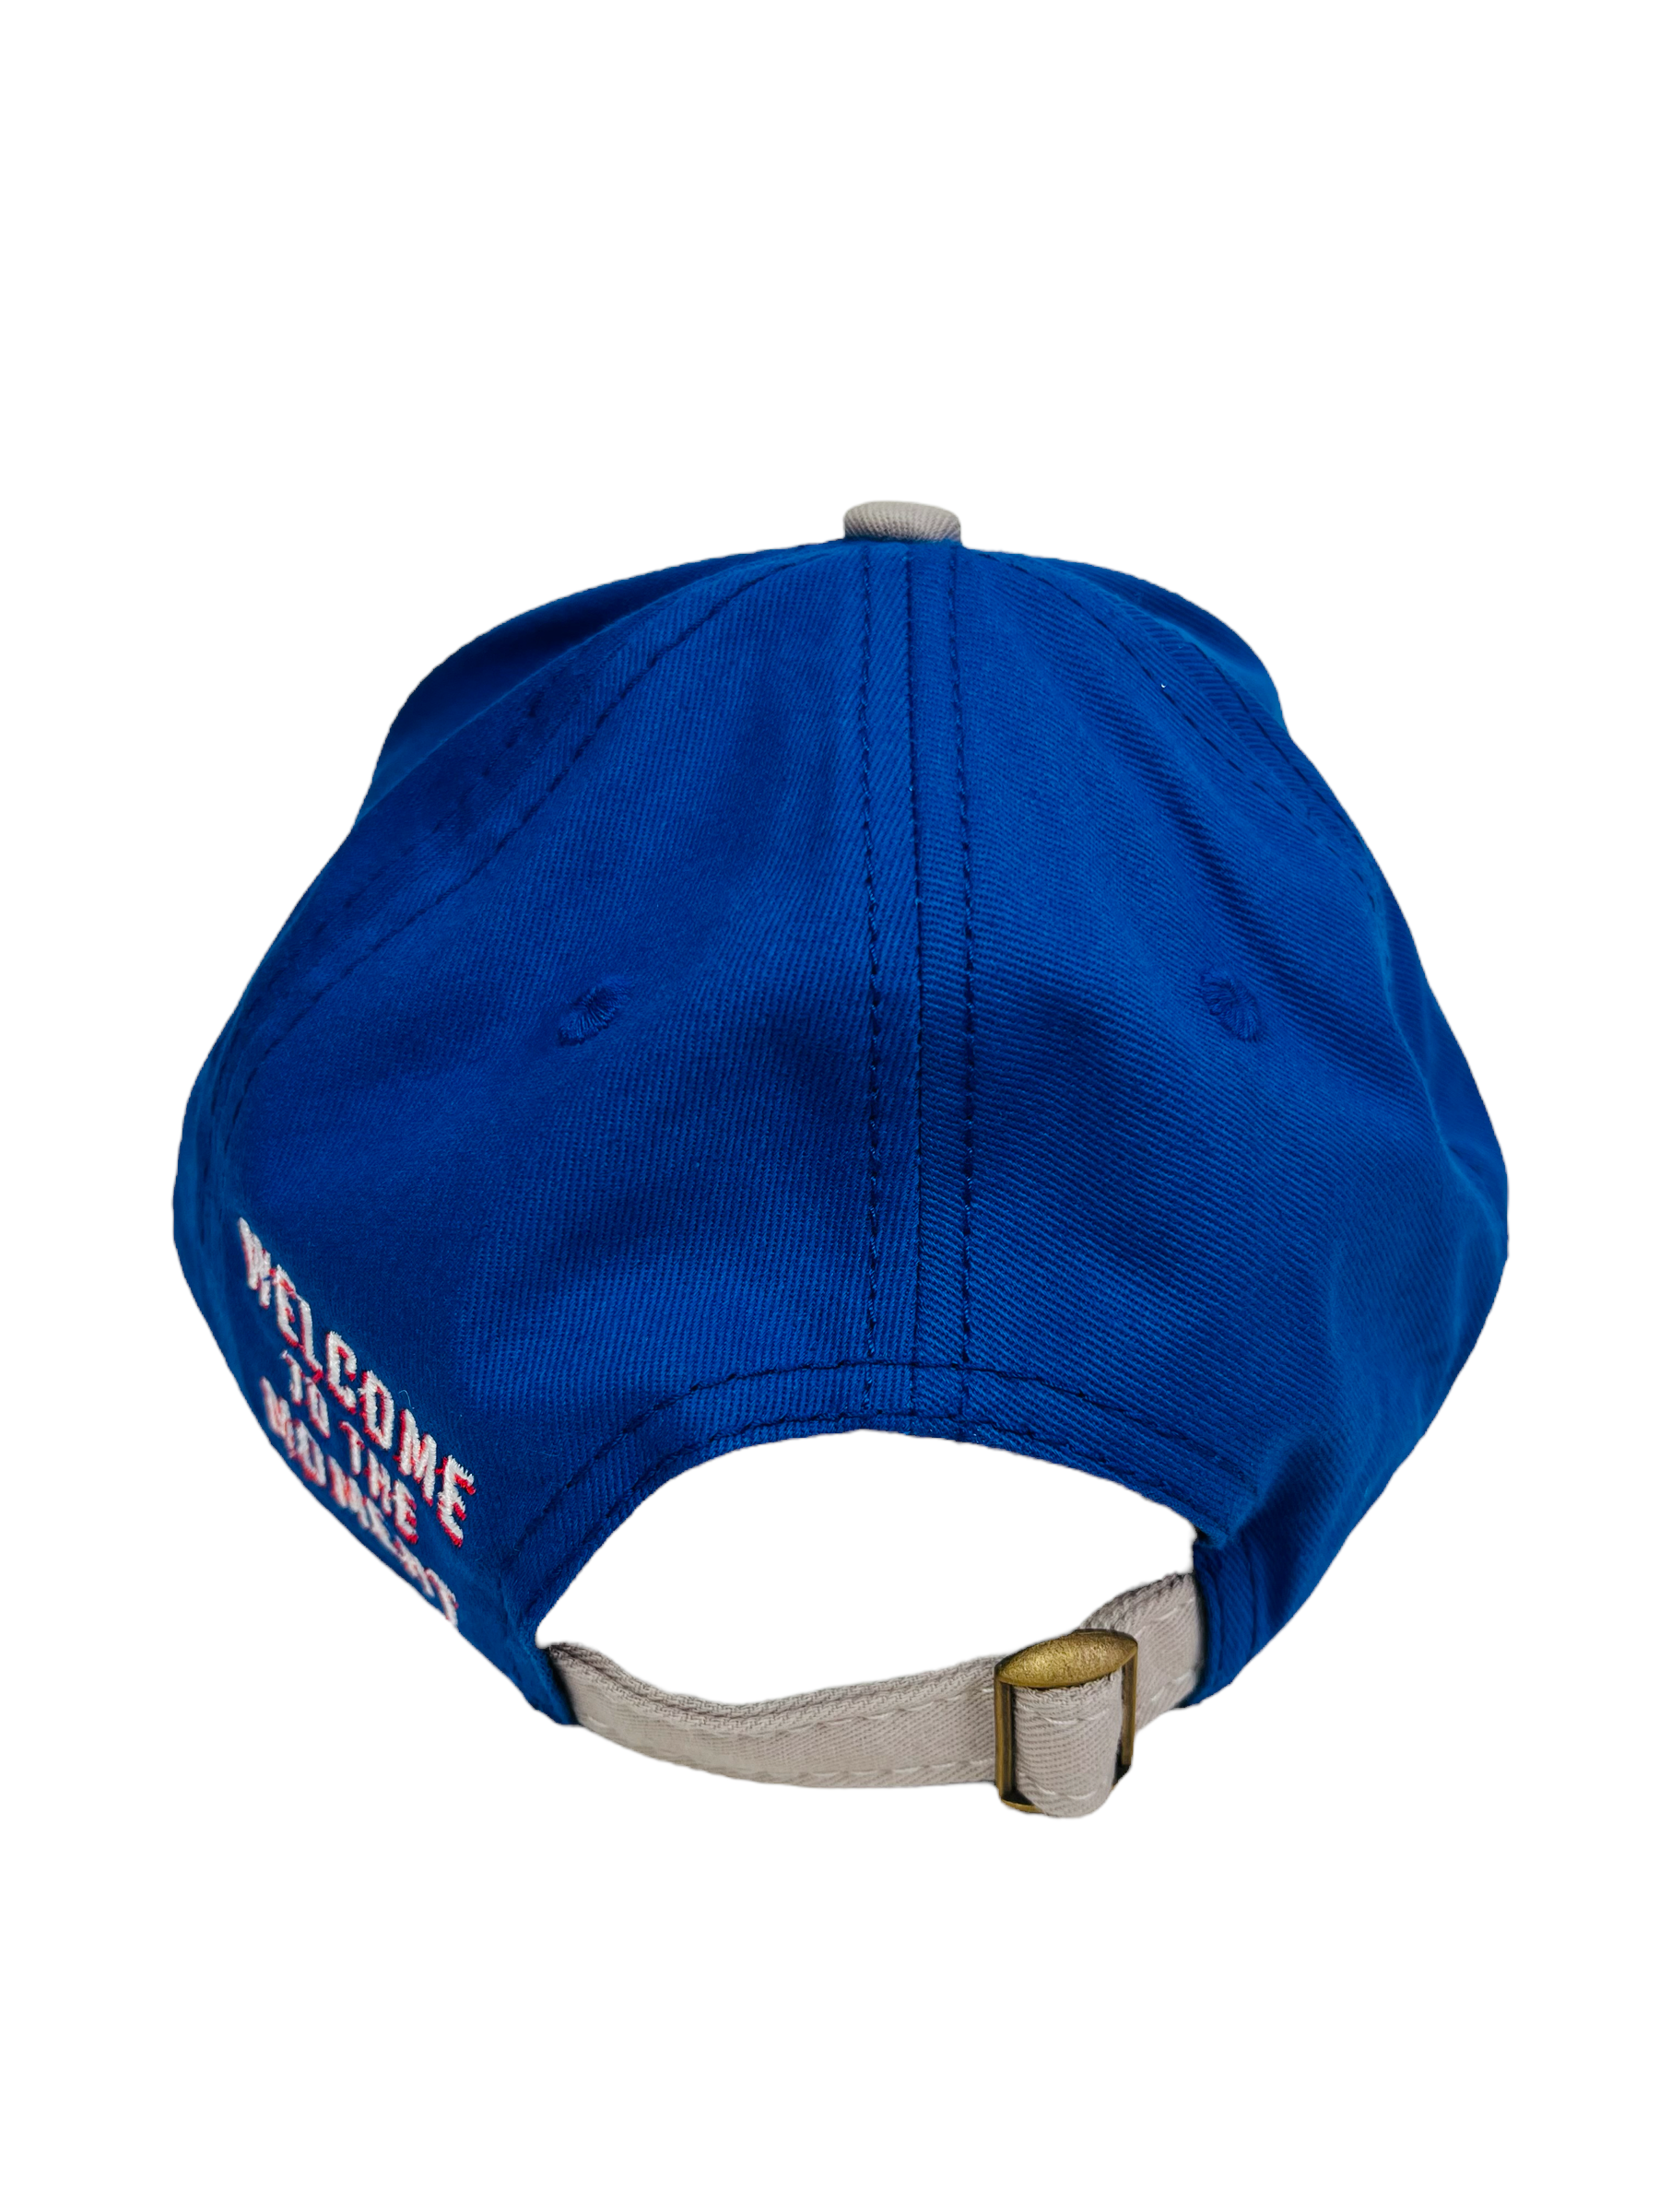 sixers hat png